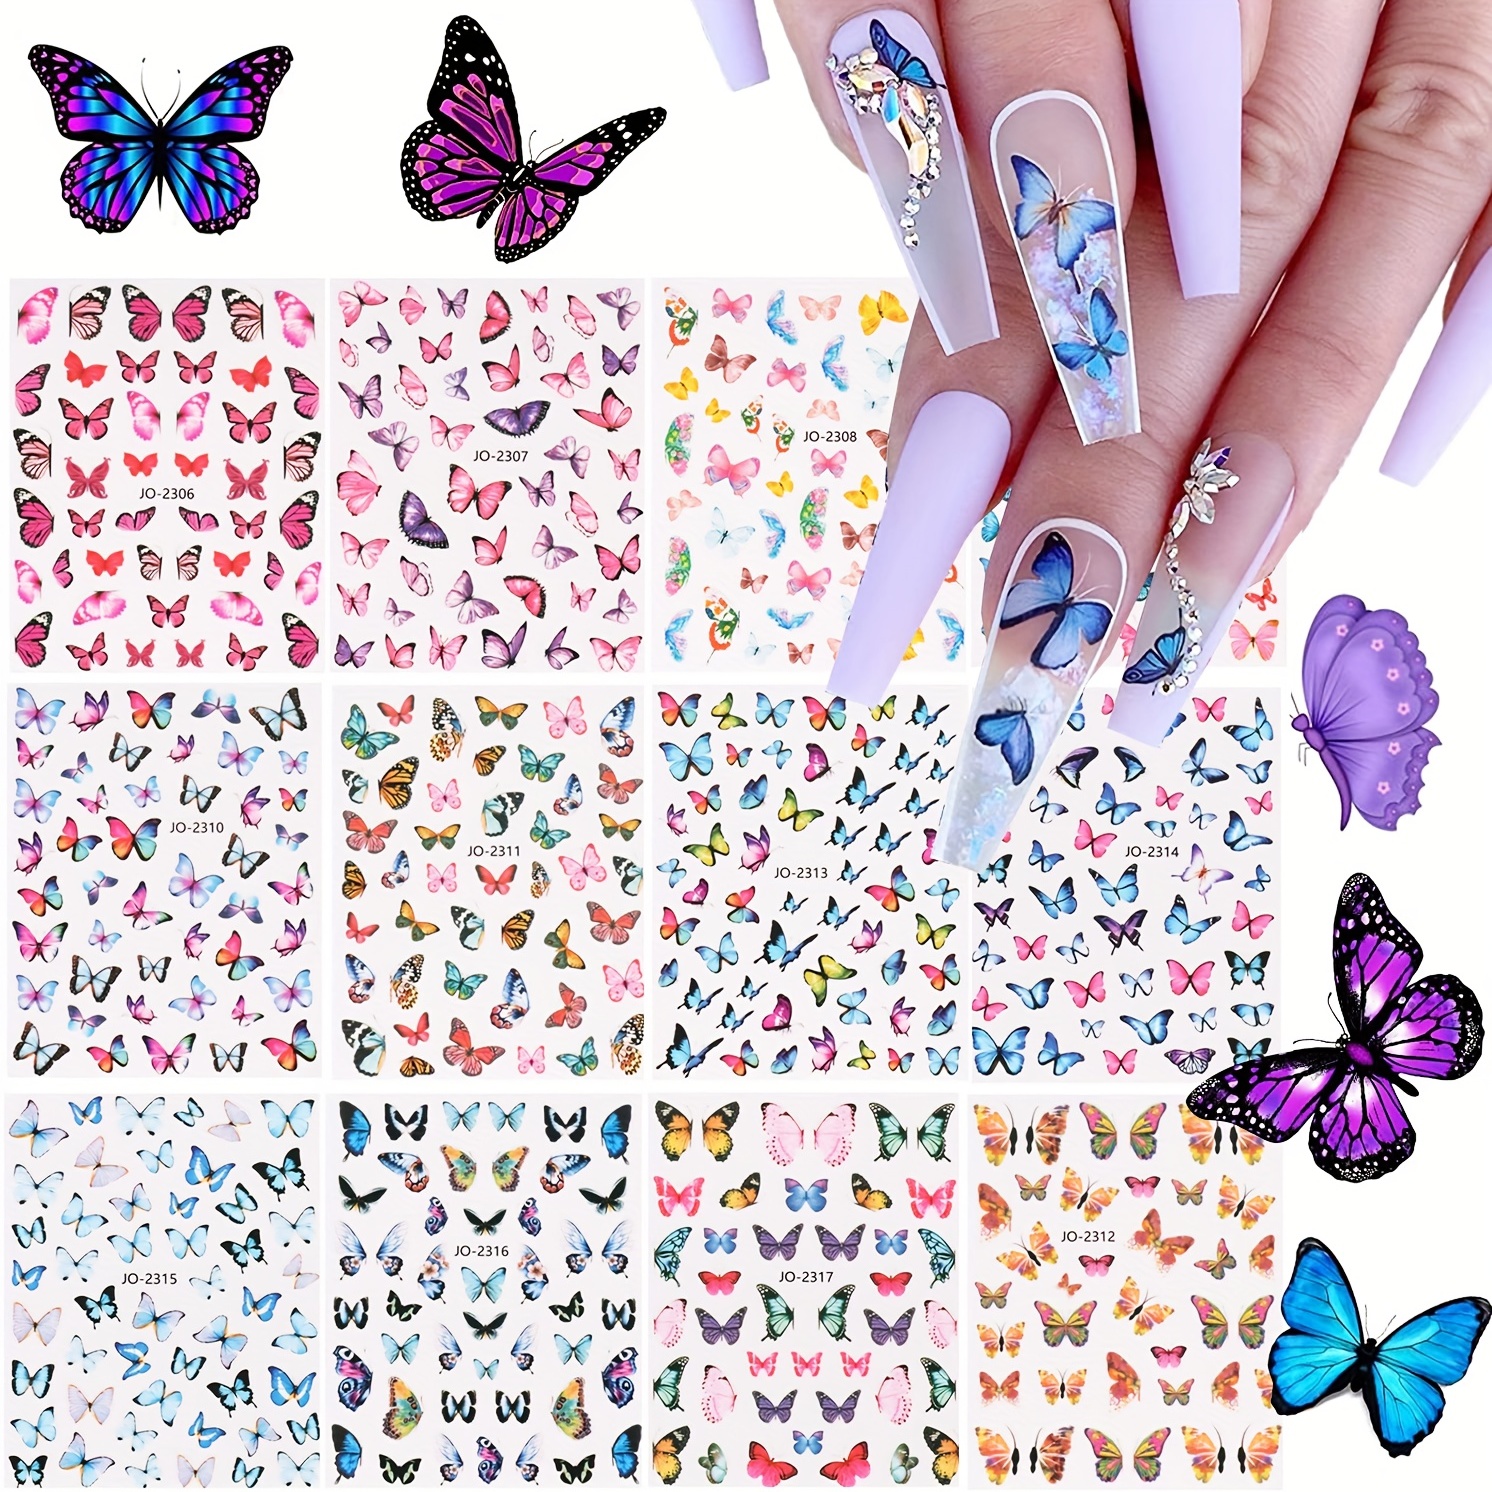 

12 Sheets, Colorful Butterfly Nail Art Stickers - Self-adhesive Decals For Diy Manicure With Beautiful Butterfly Designs - Perfect Nails Supplies For A Stunning Look